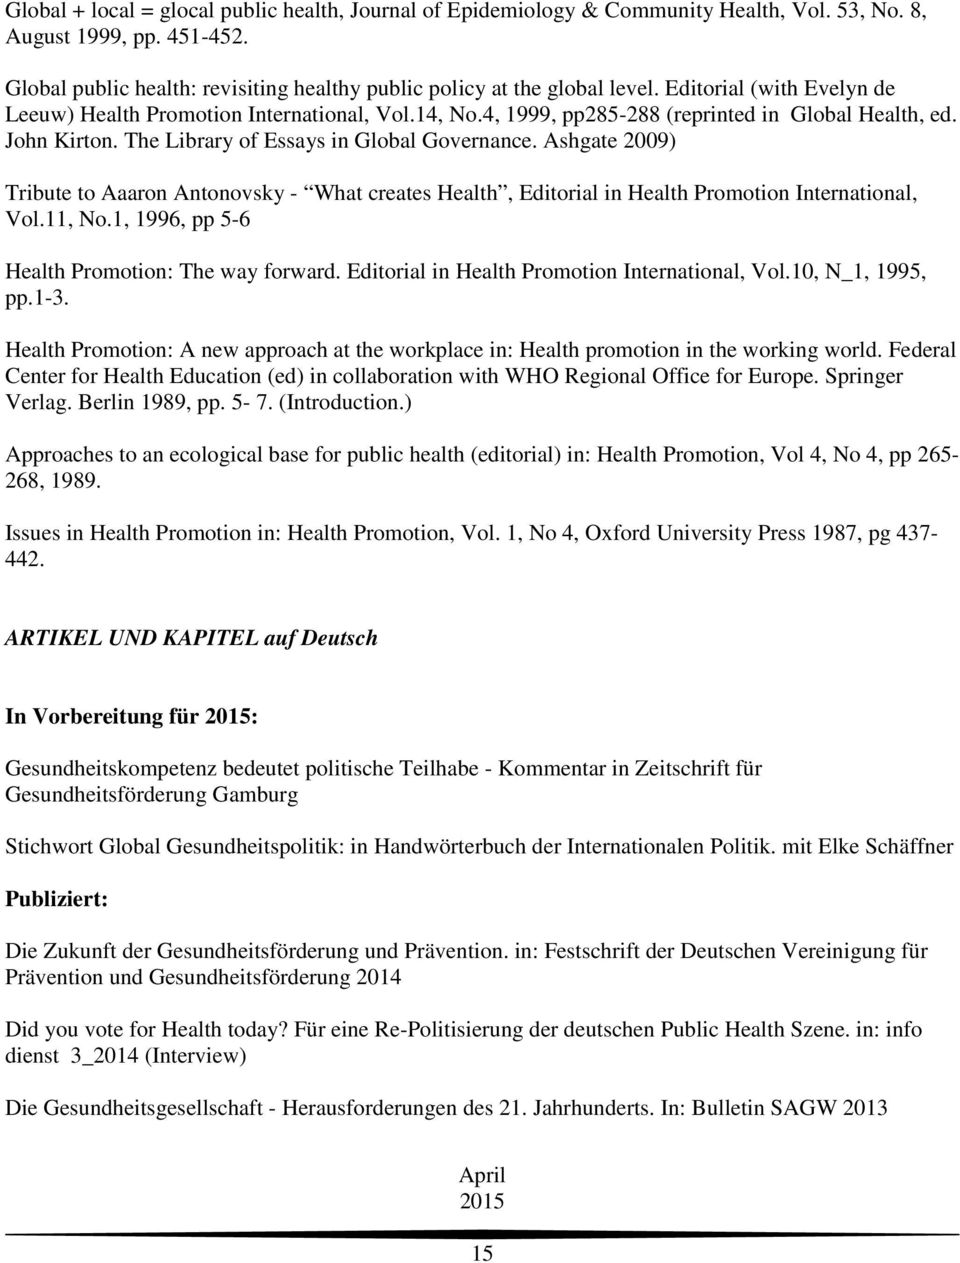 Ashgate 2009) Tribute to Aaaron Antonovsky - What creates Health, Editorial in Health Promotion International, Vol.11, No.1, 1996, pp 5-6 Health Promotion: The way forward.